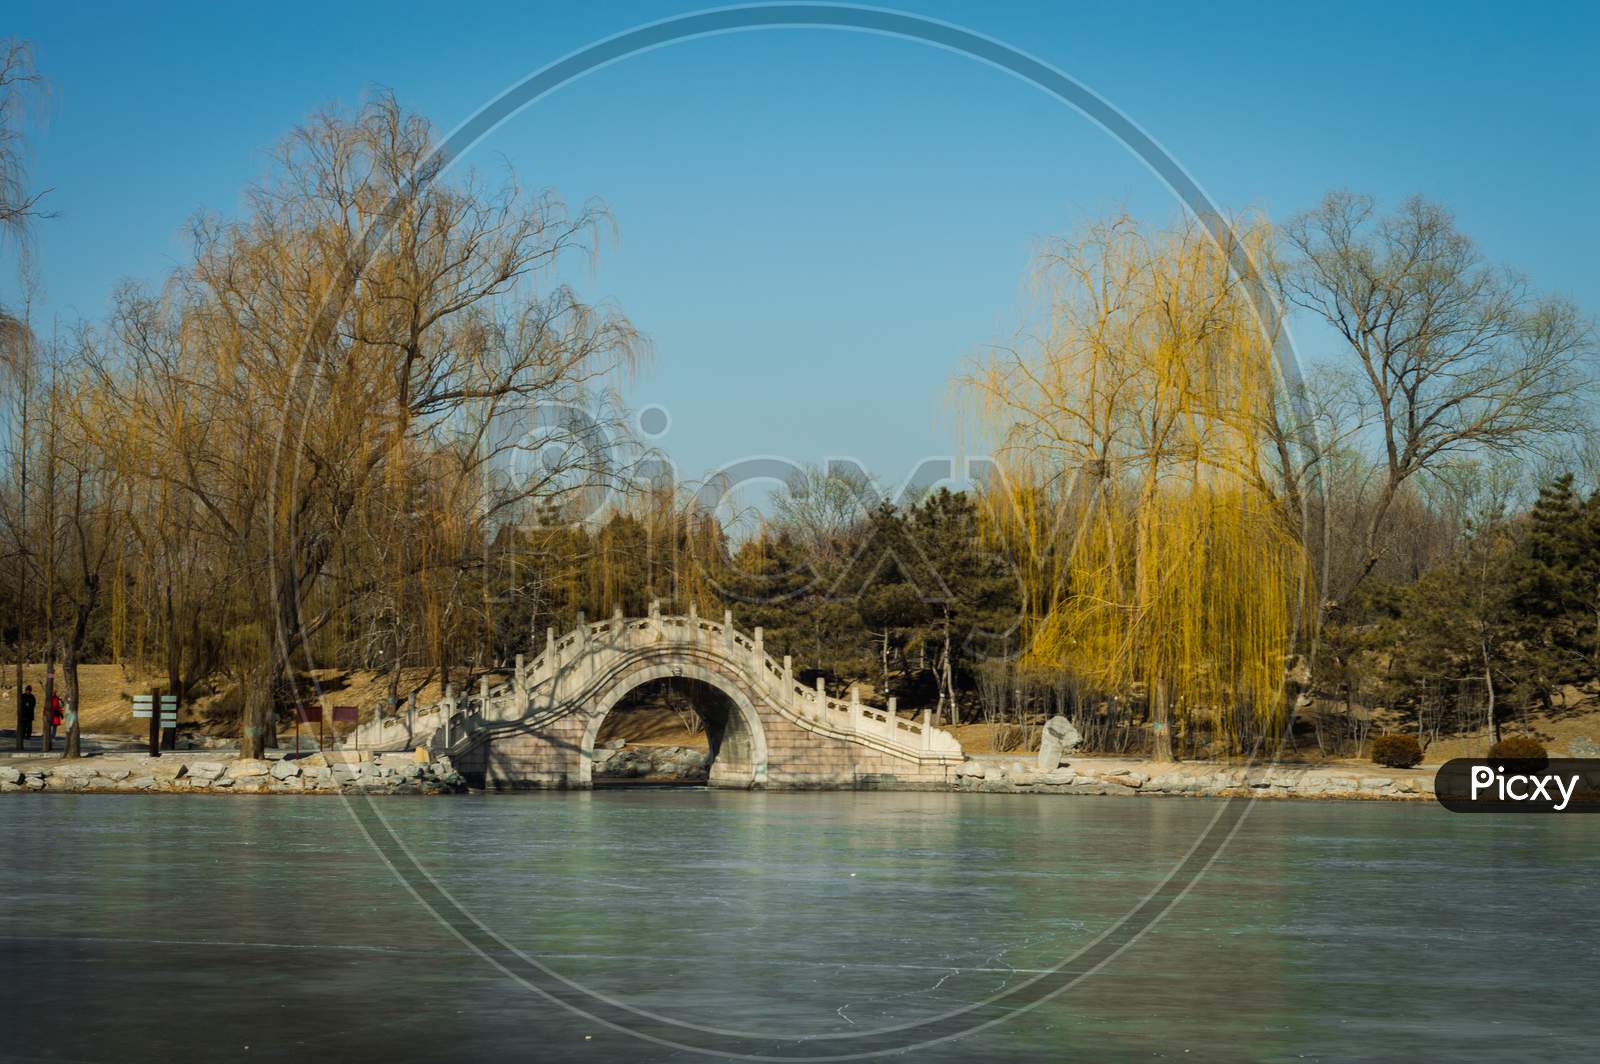 Imperial Gardens Of The Old Summer Palace (Yuanming Yuan) In Beijing, China